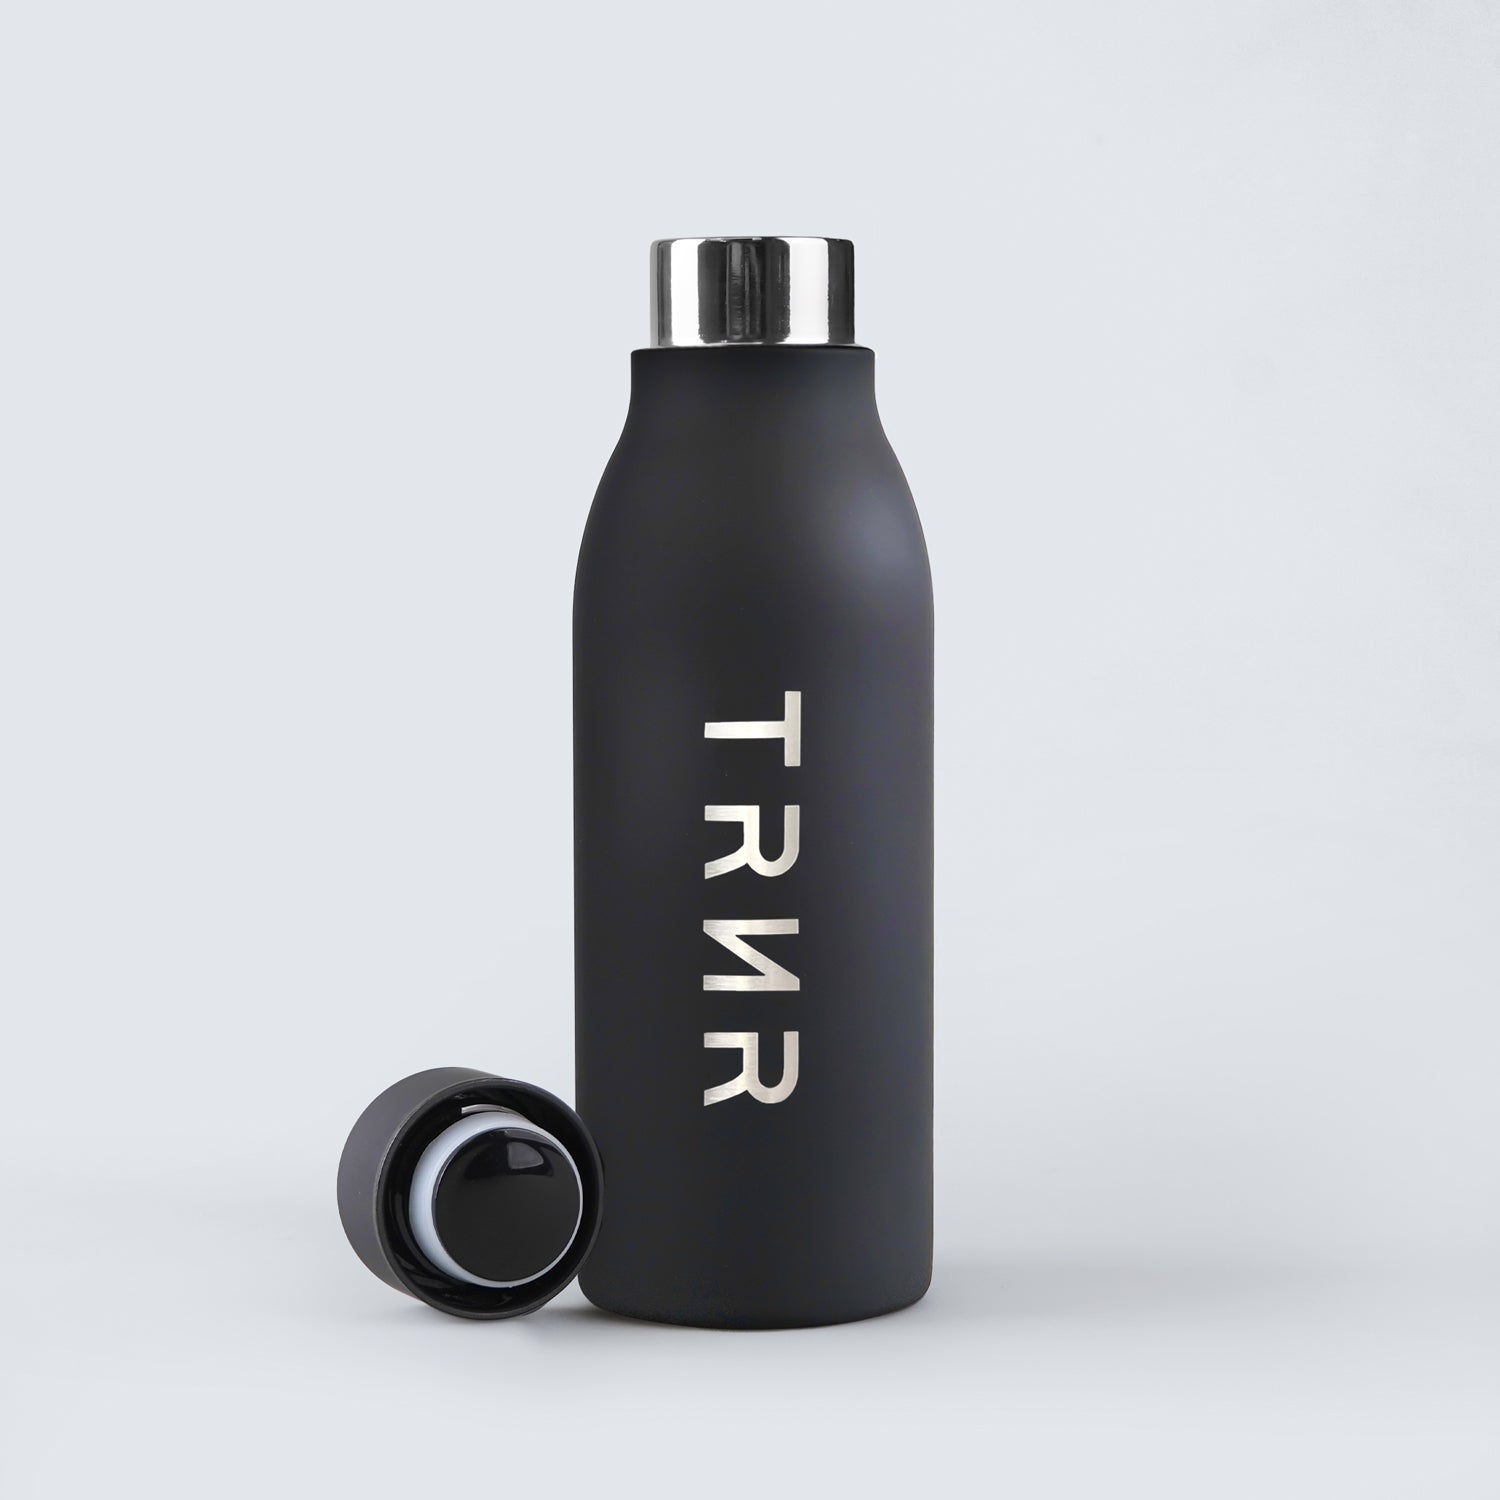 TRNR Bliss Bottle (Black) in 600 ml capacity | Product Overview Featuring TRNR Logo and Powder-Coated Finish - Lid Open